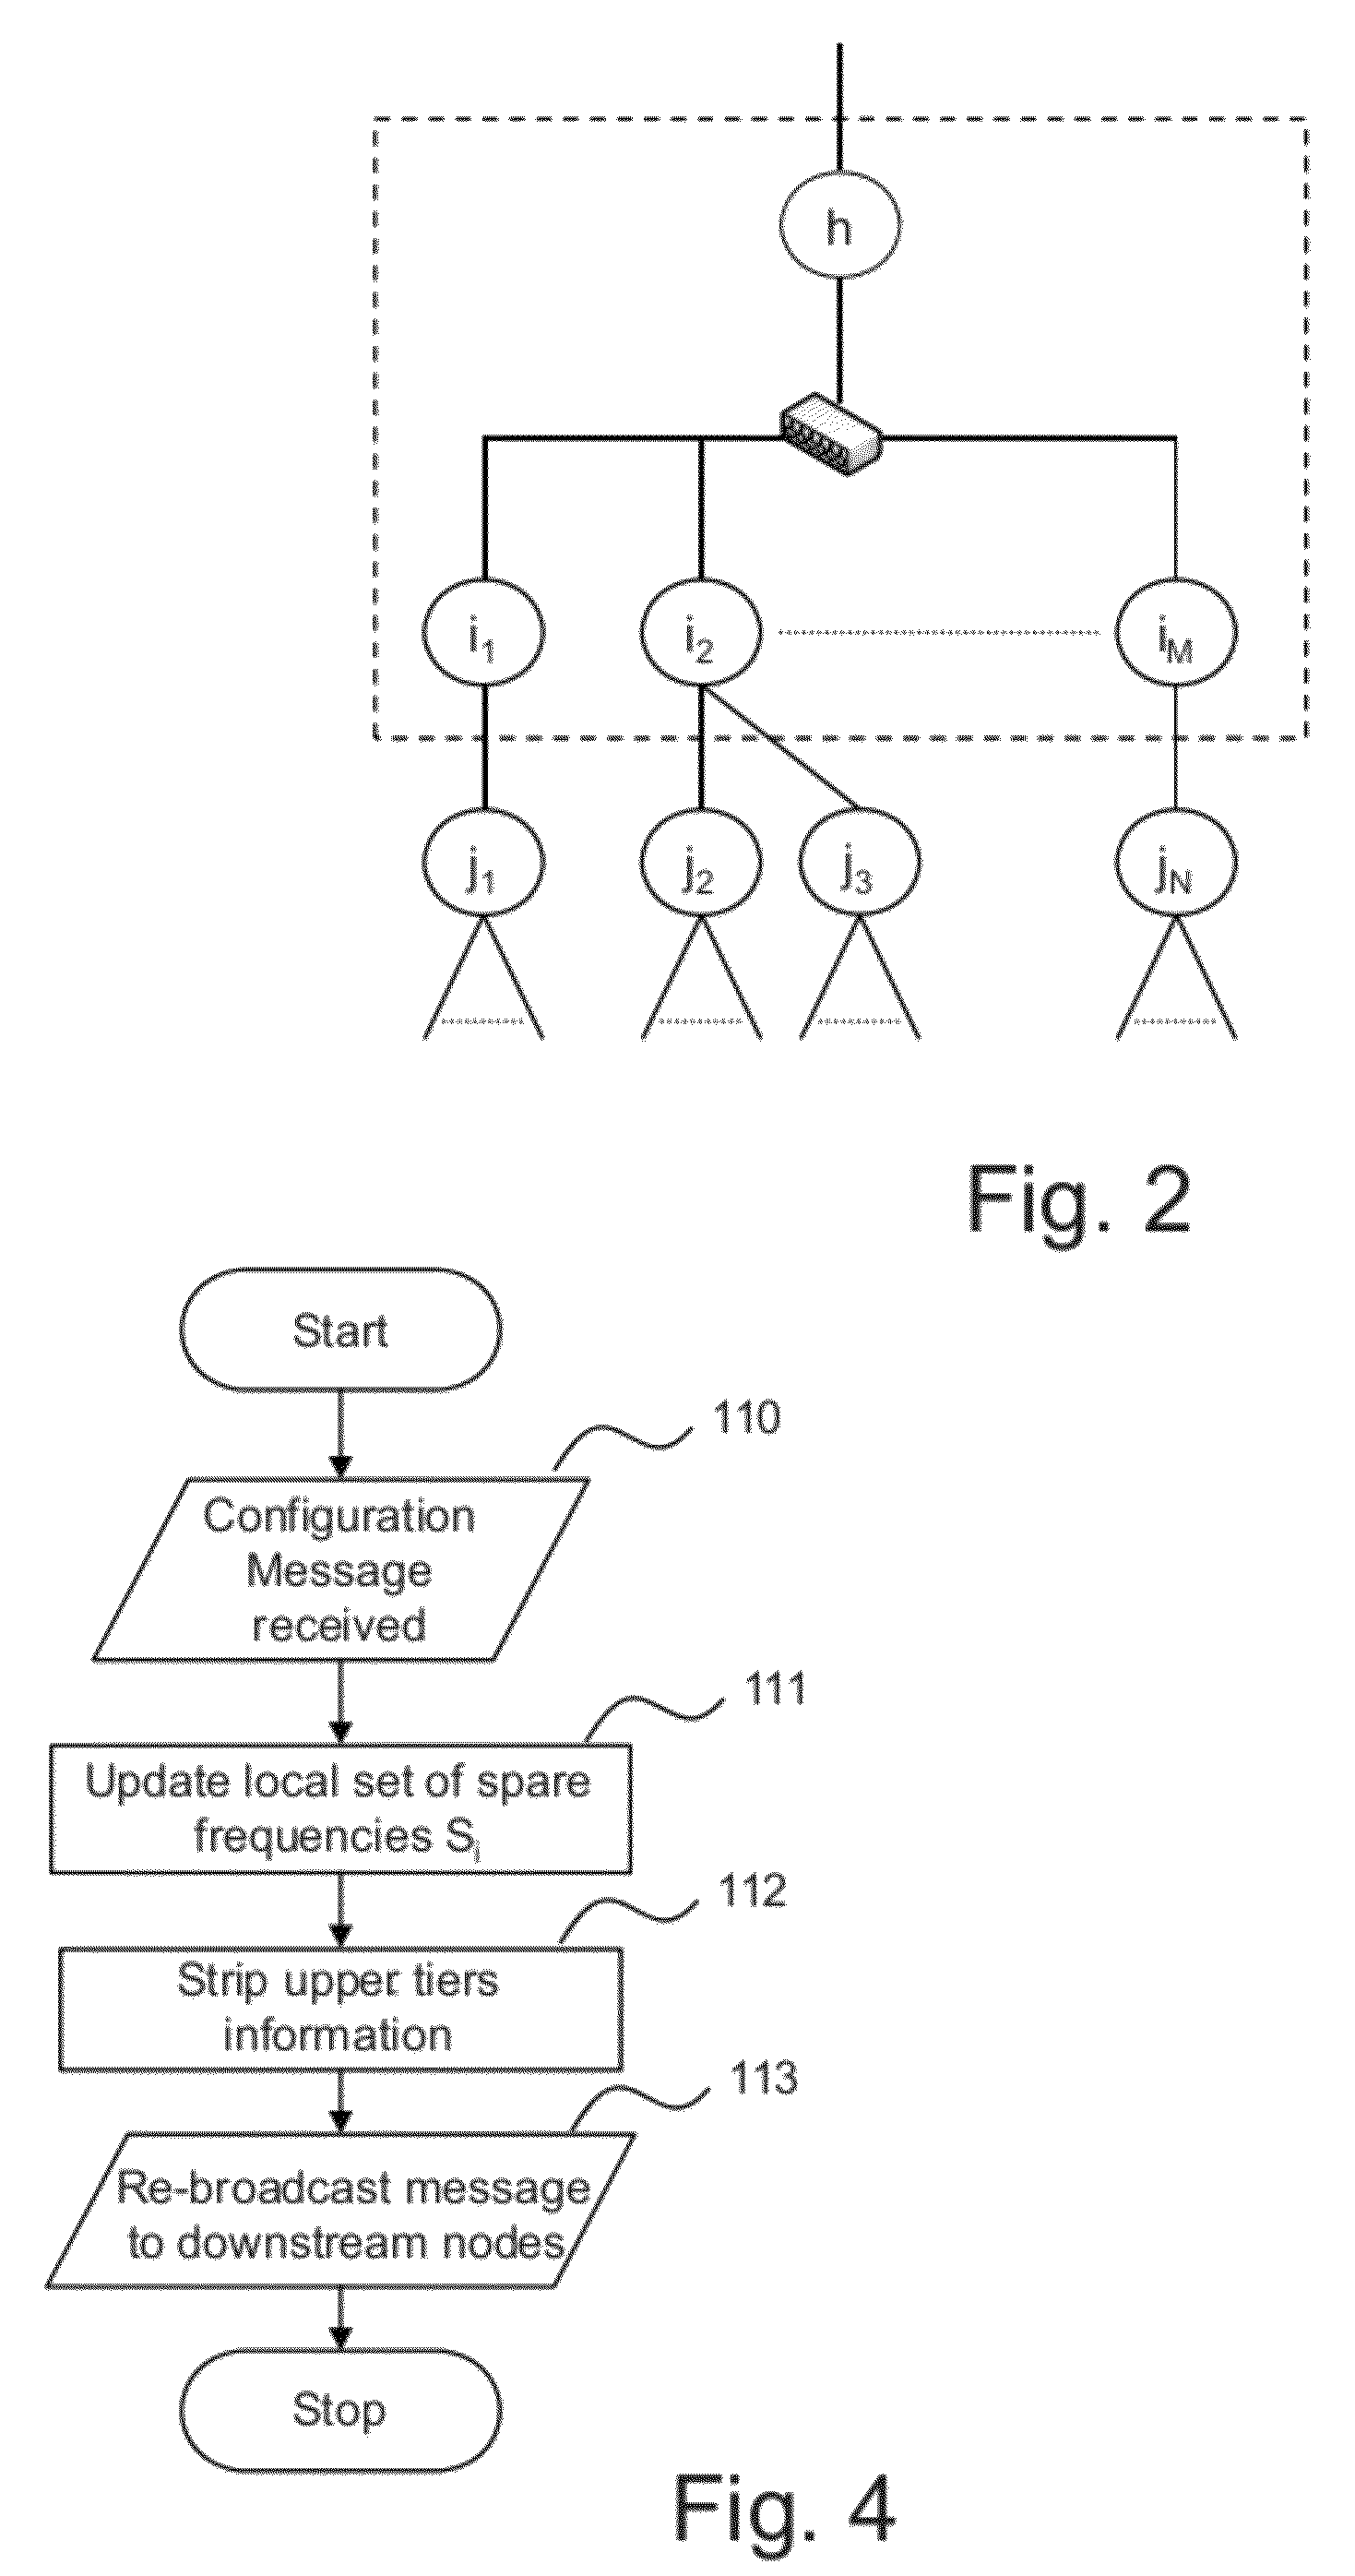 Management of radio frequencies in a wireless or hybrid mesh network